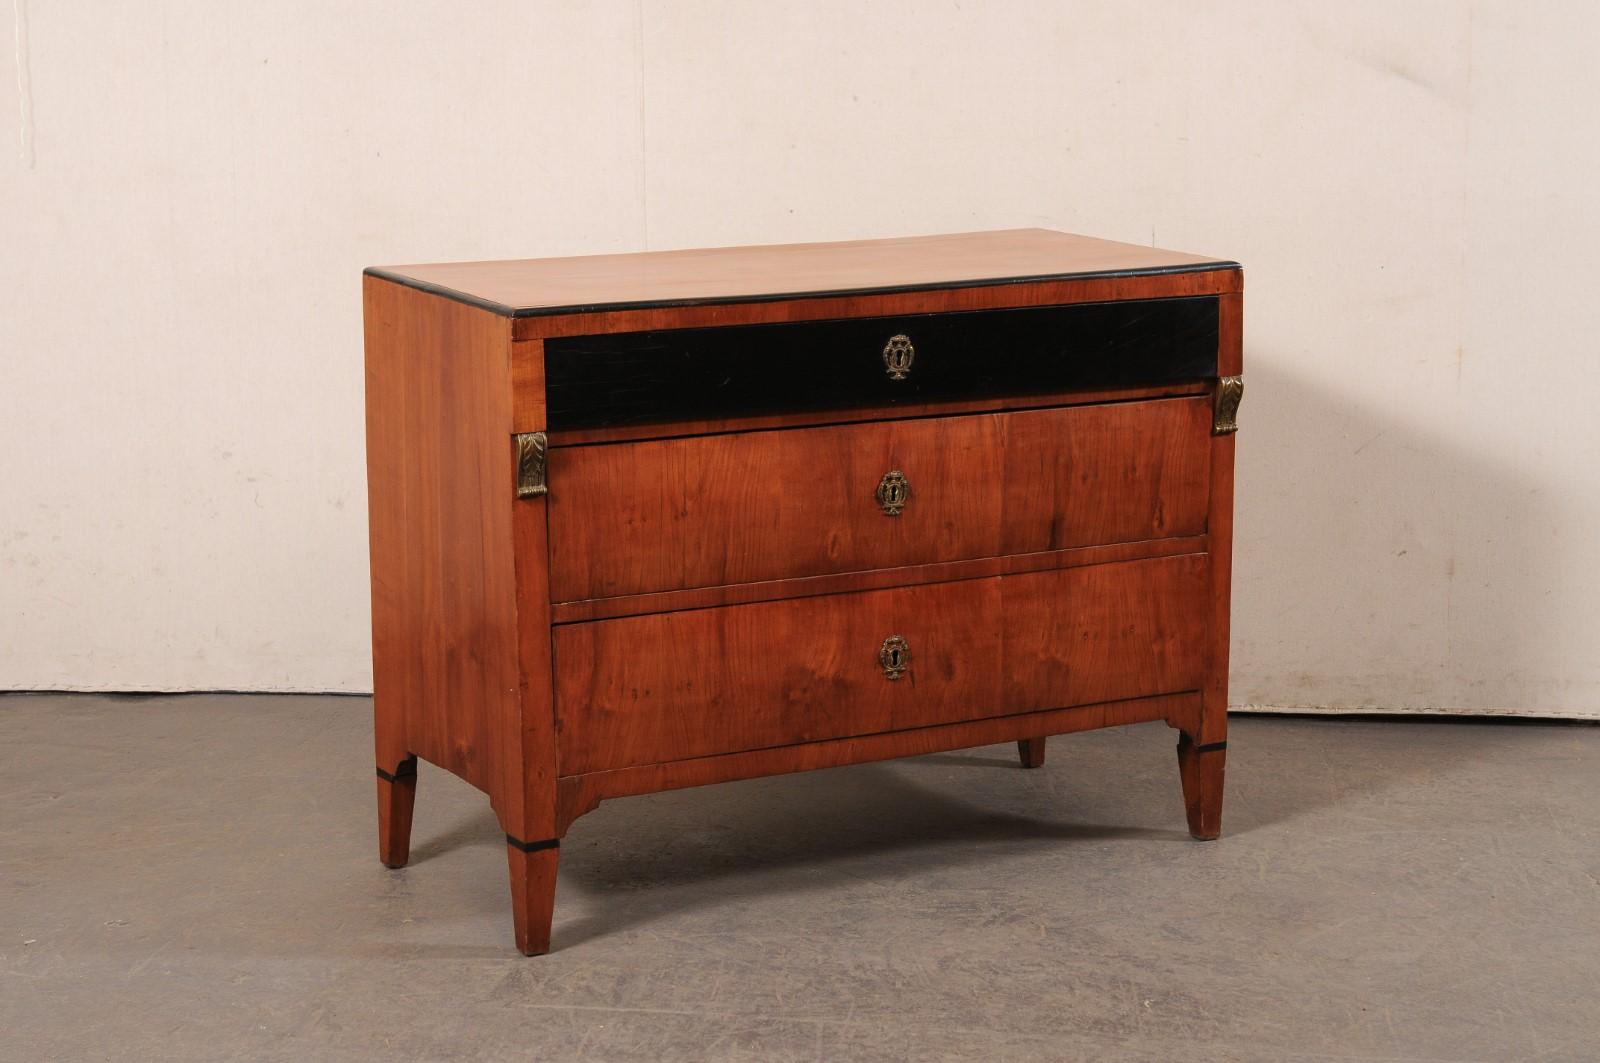 A French Empire period commode, with black and brass accents, from the early 19th century. This antique chest from France features a rectangular-shaped top, with case which houses three graduated drawers, with upper drawers flanked within front side